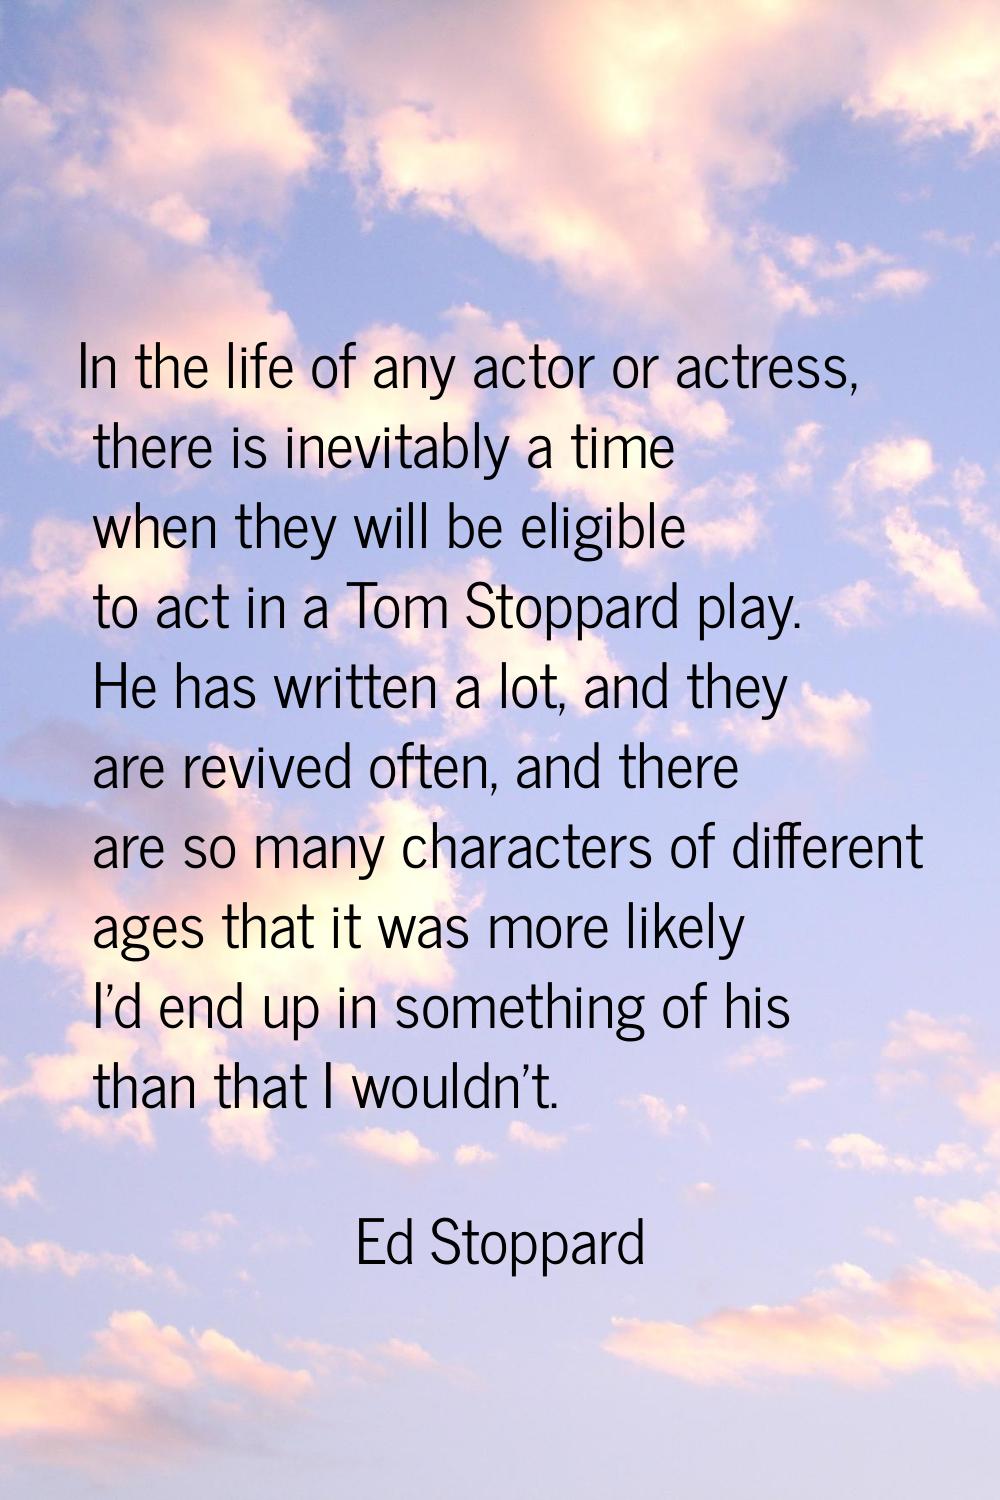 In the life of any actor or actress, there is inevitably a time when they will be eligible to act i